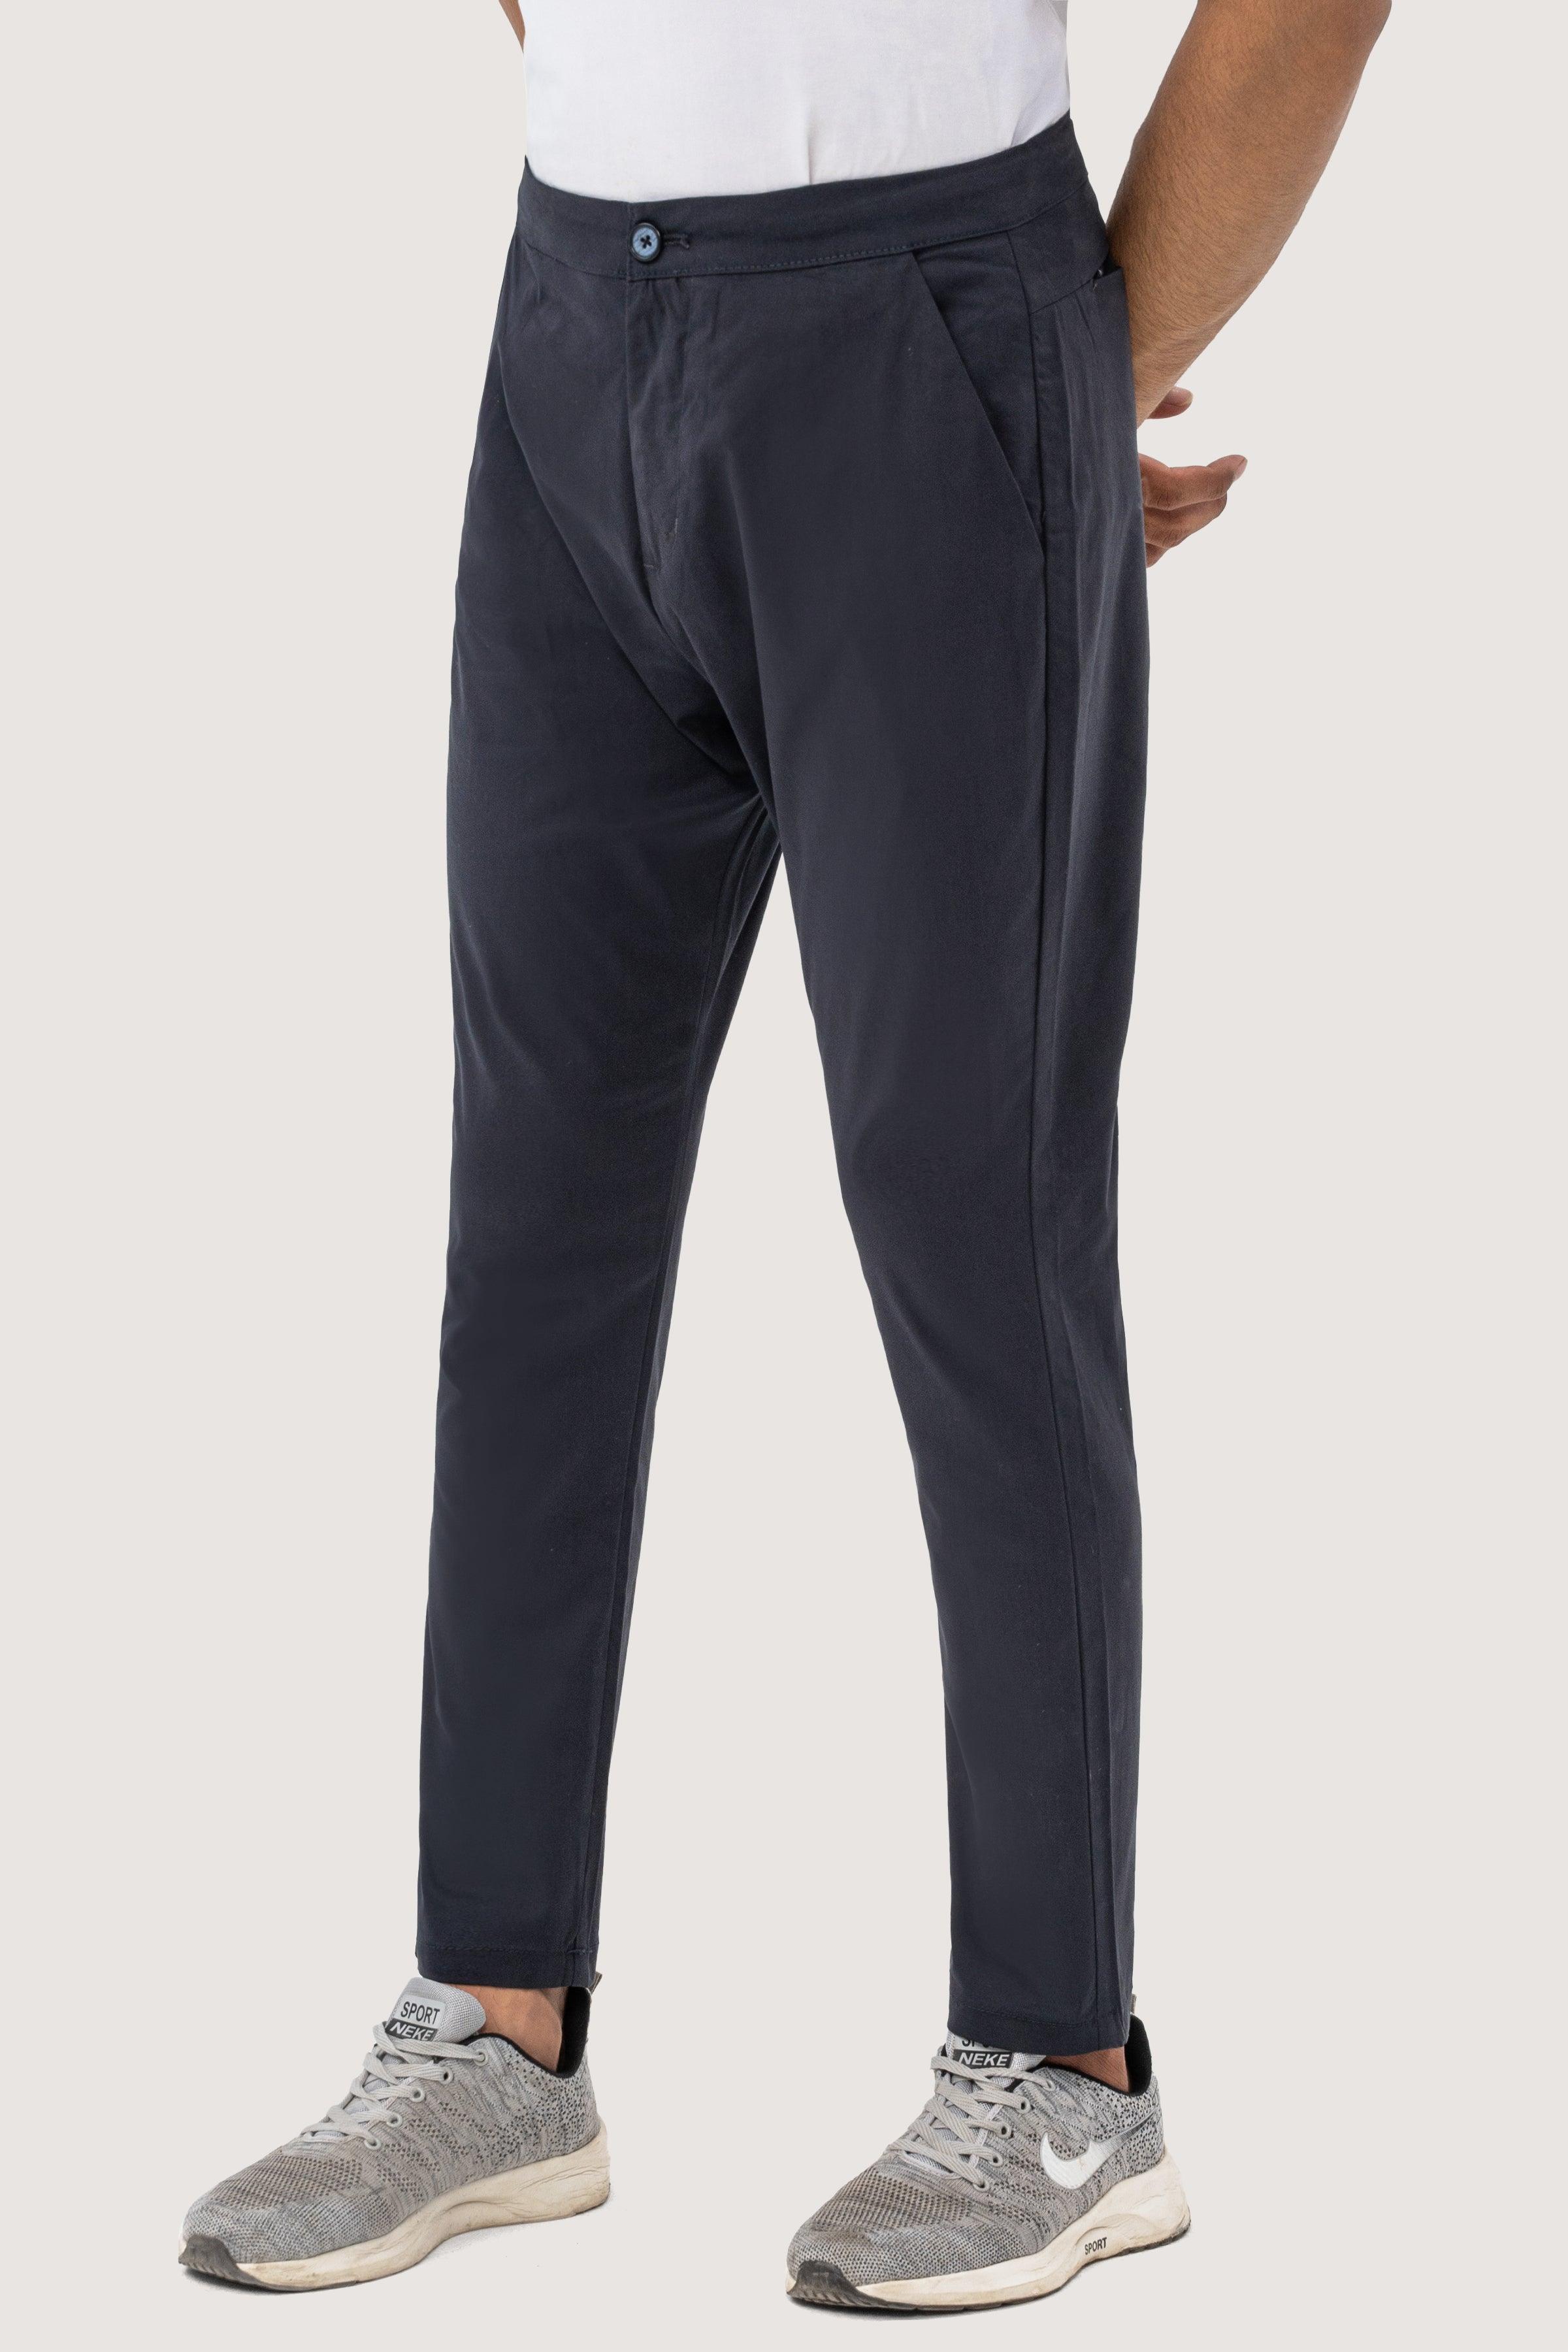 CASUAL CROSS POCKET TROUSER NAVY at Charcoal Clothing